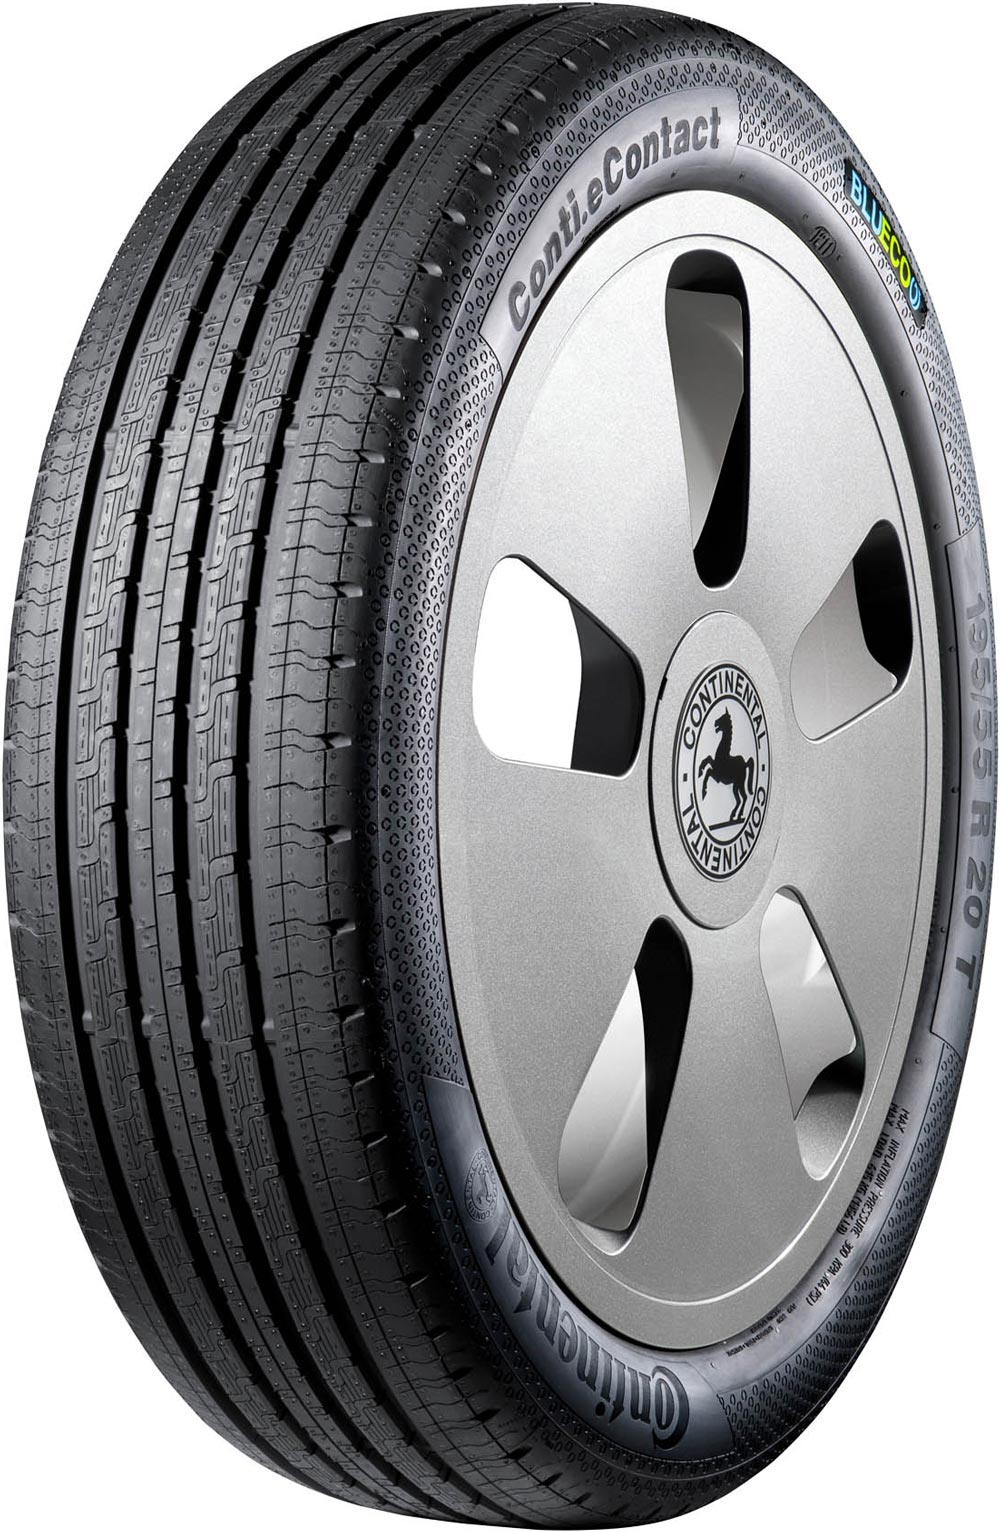 CONTINENTAL Conti eContact 145/80 R13 75M